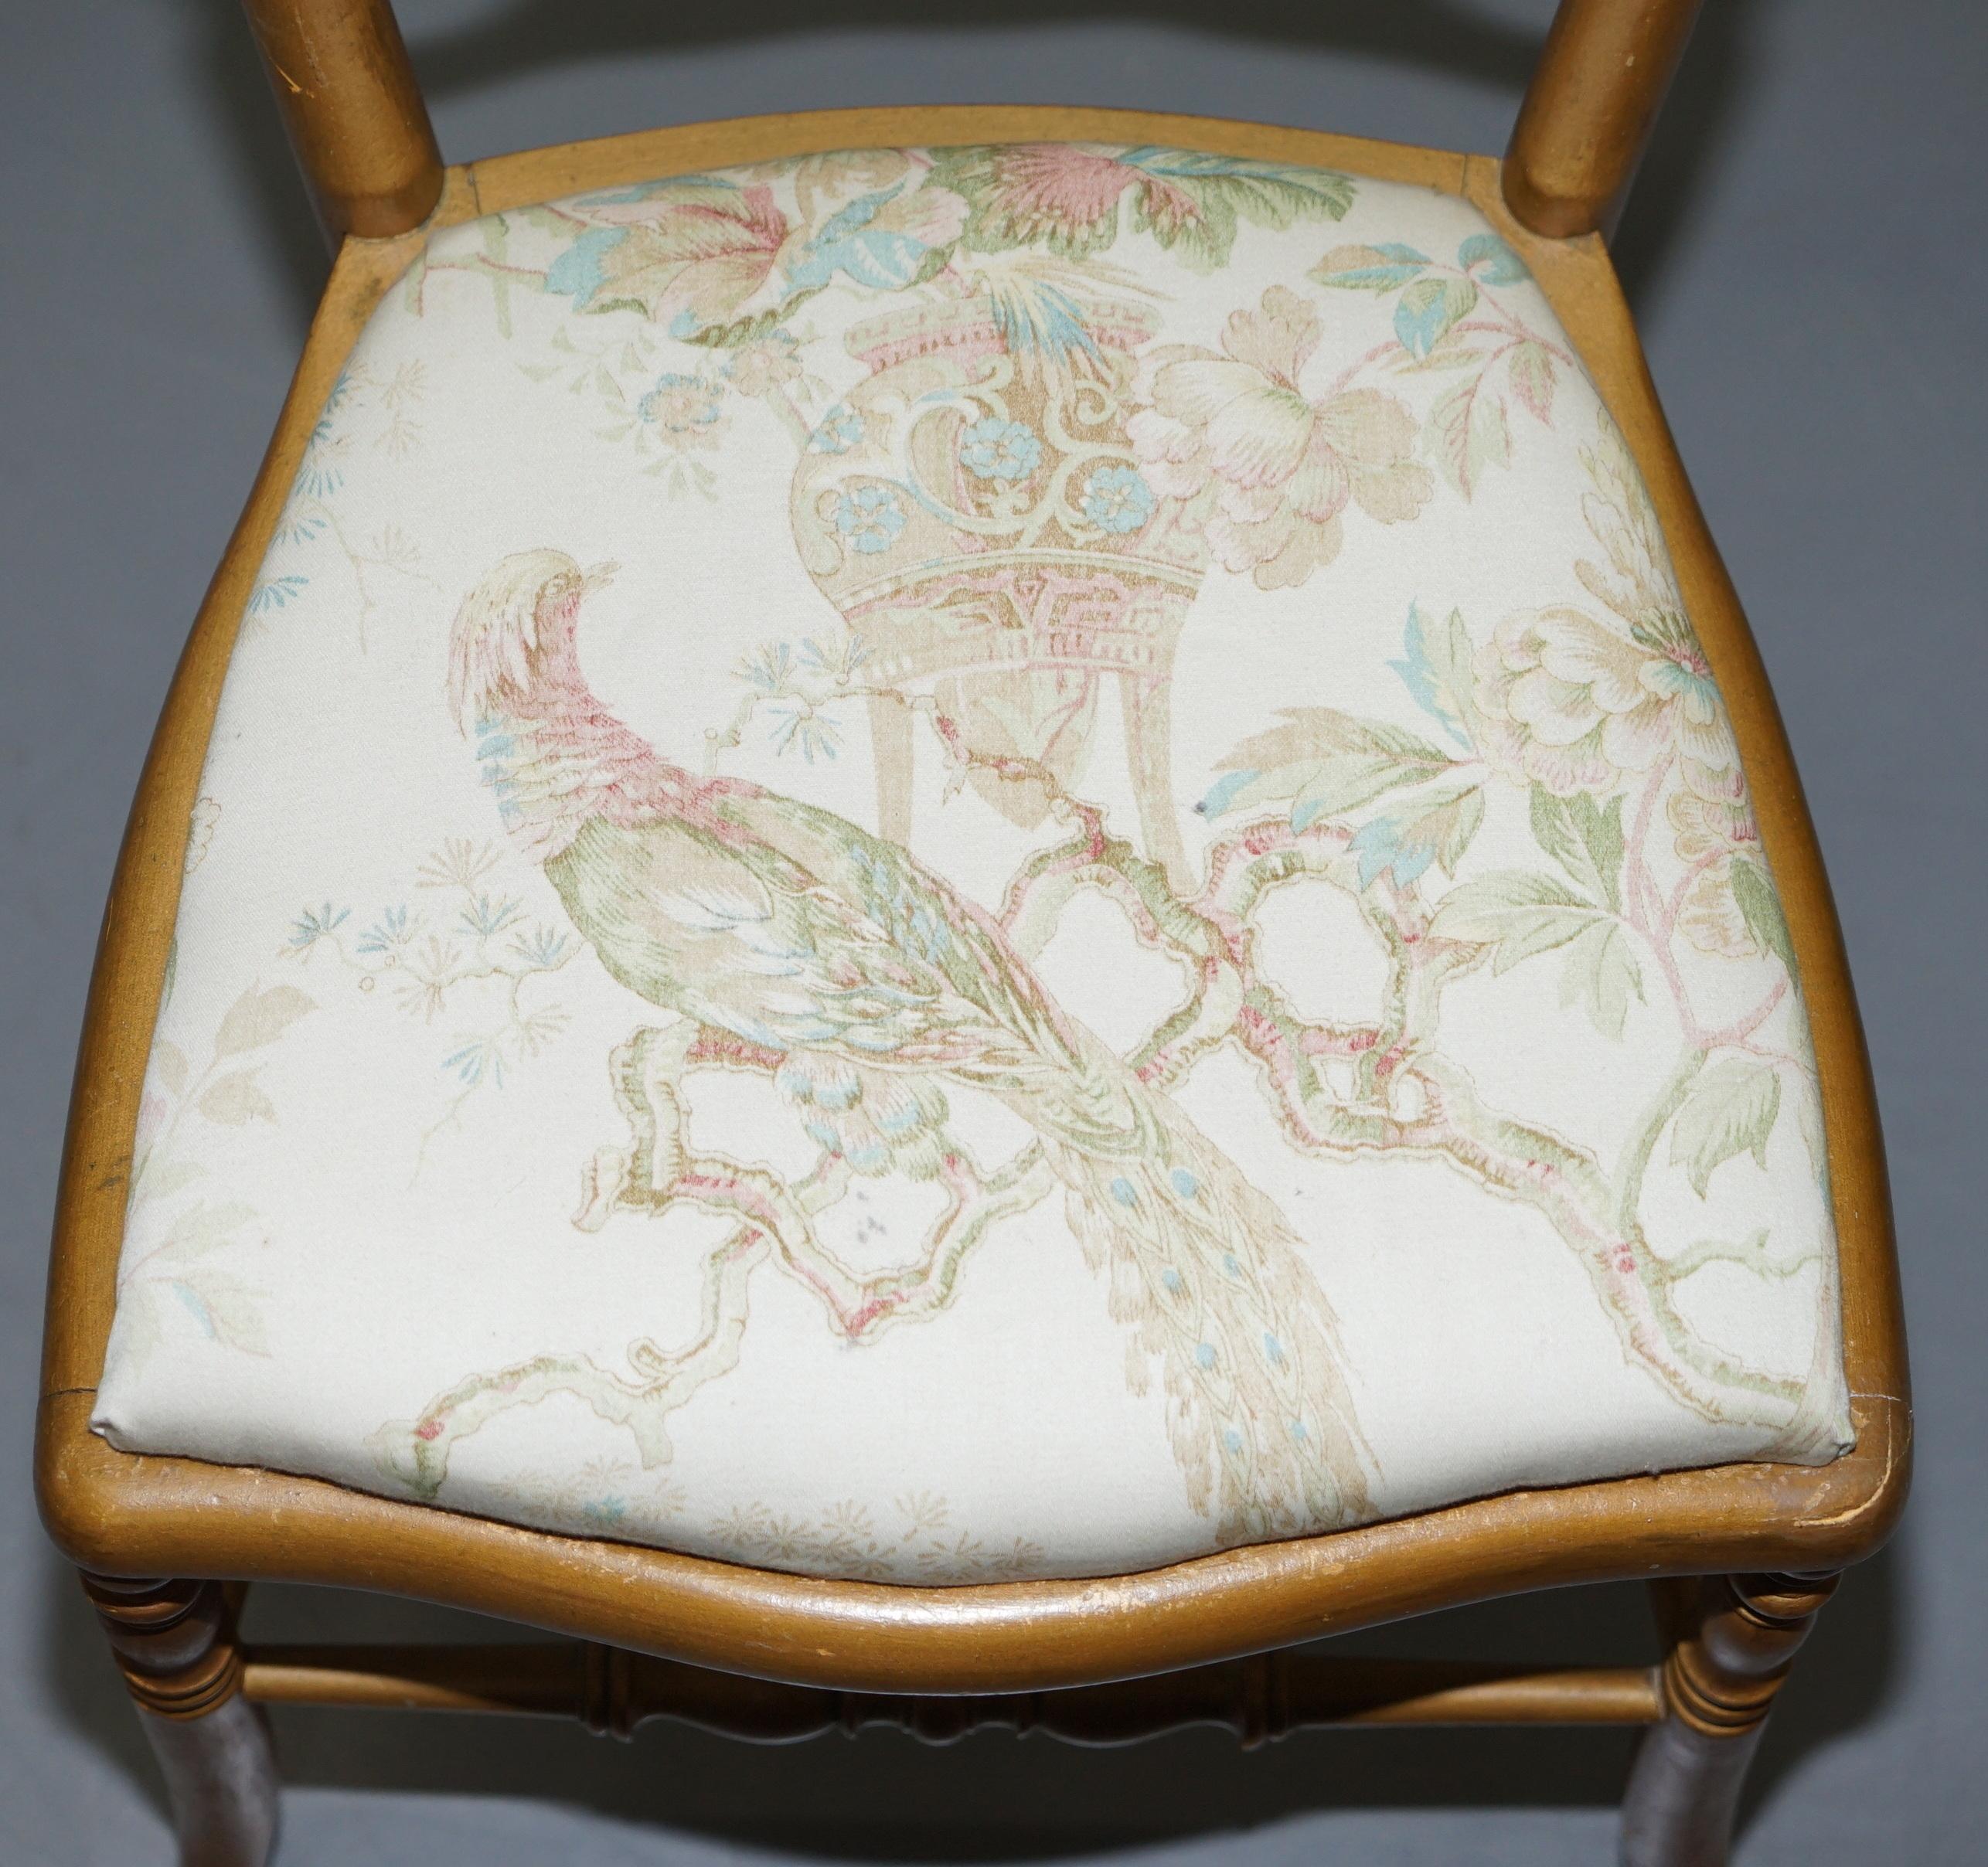 English Regency Style Gold Giltwood Spindle Chair circa 1900 Ornate Bird Upholstery For Sale